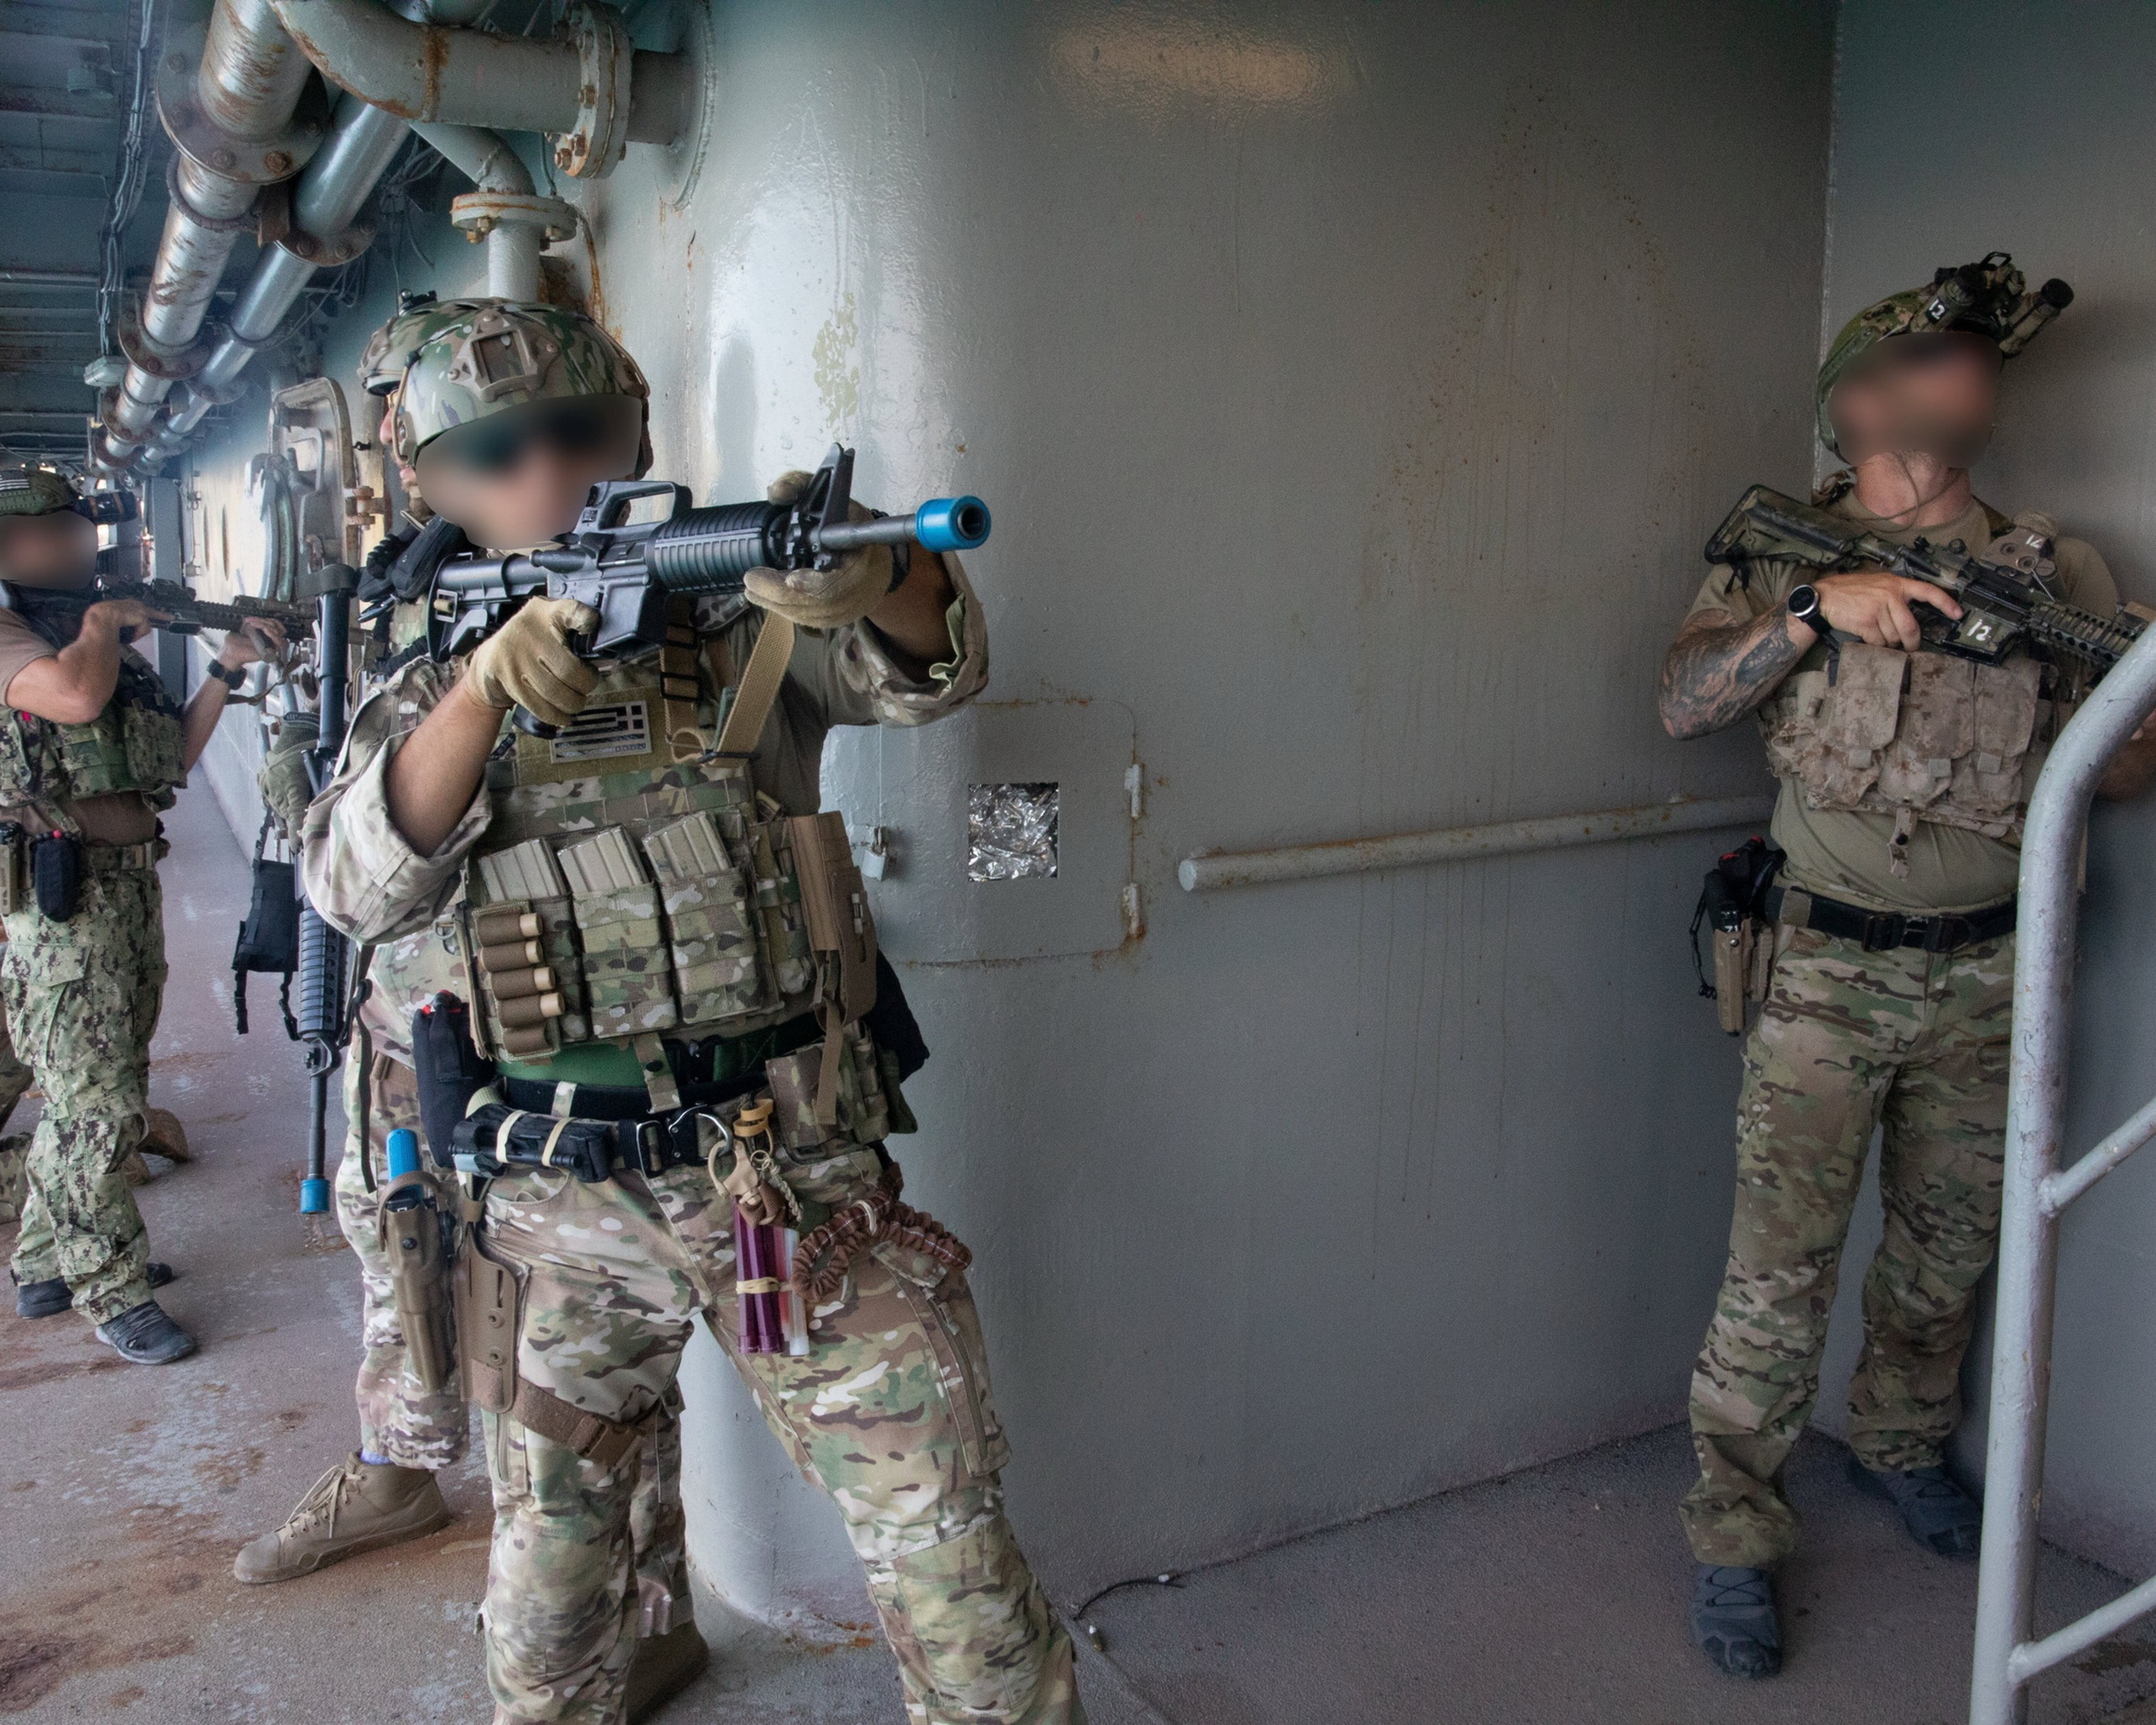 Visit, Board, Search and Seizure (VBSS), Greece, 31 July 2020